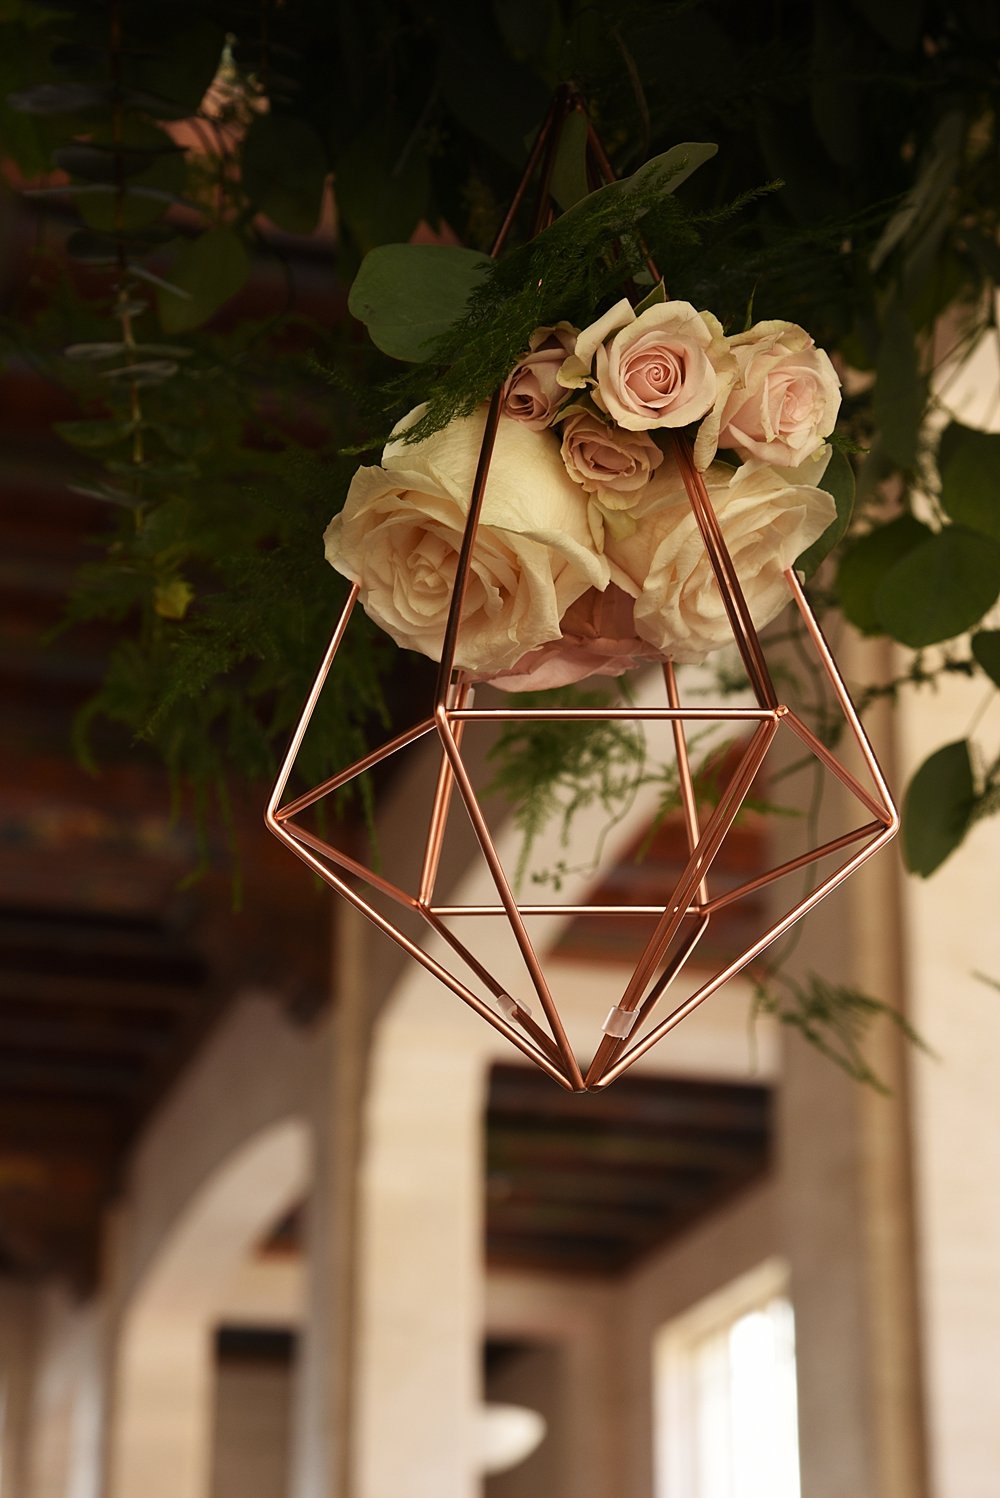 Modern Touches were added into the vintage garden wedding design with fun geometric shapes in the floral arrangements | Vintage Garden Wedding at the Historic Alfred I DuPont Building in Miami, FL